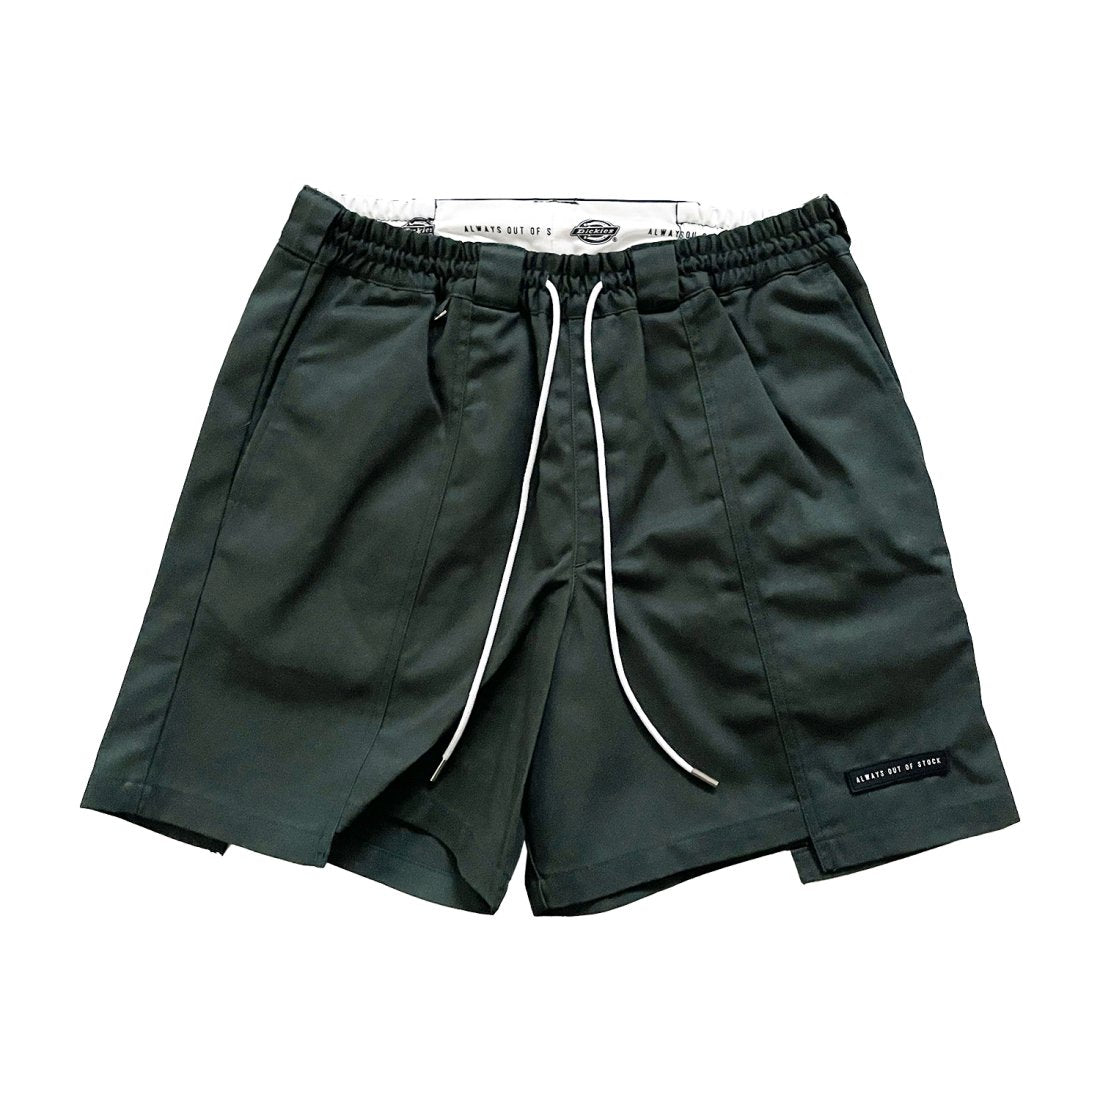 ALWAYS OUT OF STOCK × DICKIESのSWITCHED SHORTS